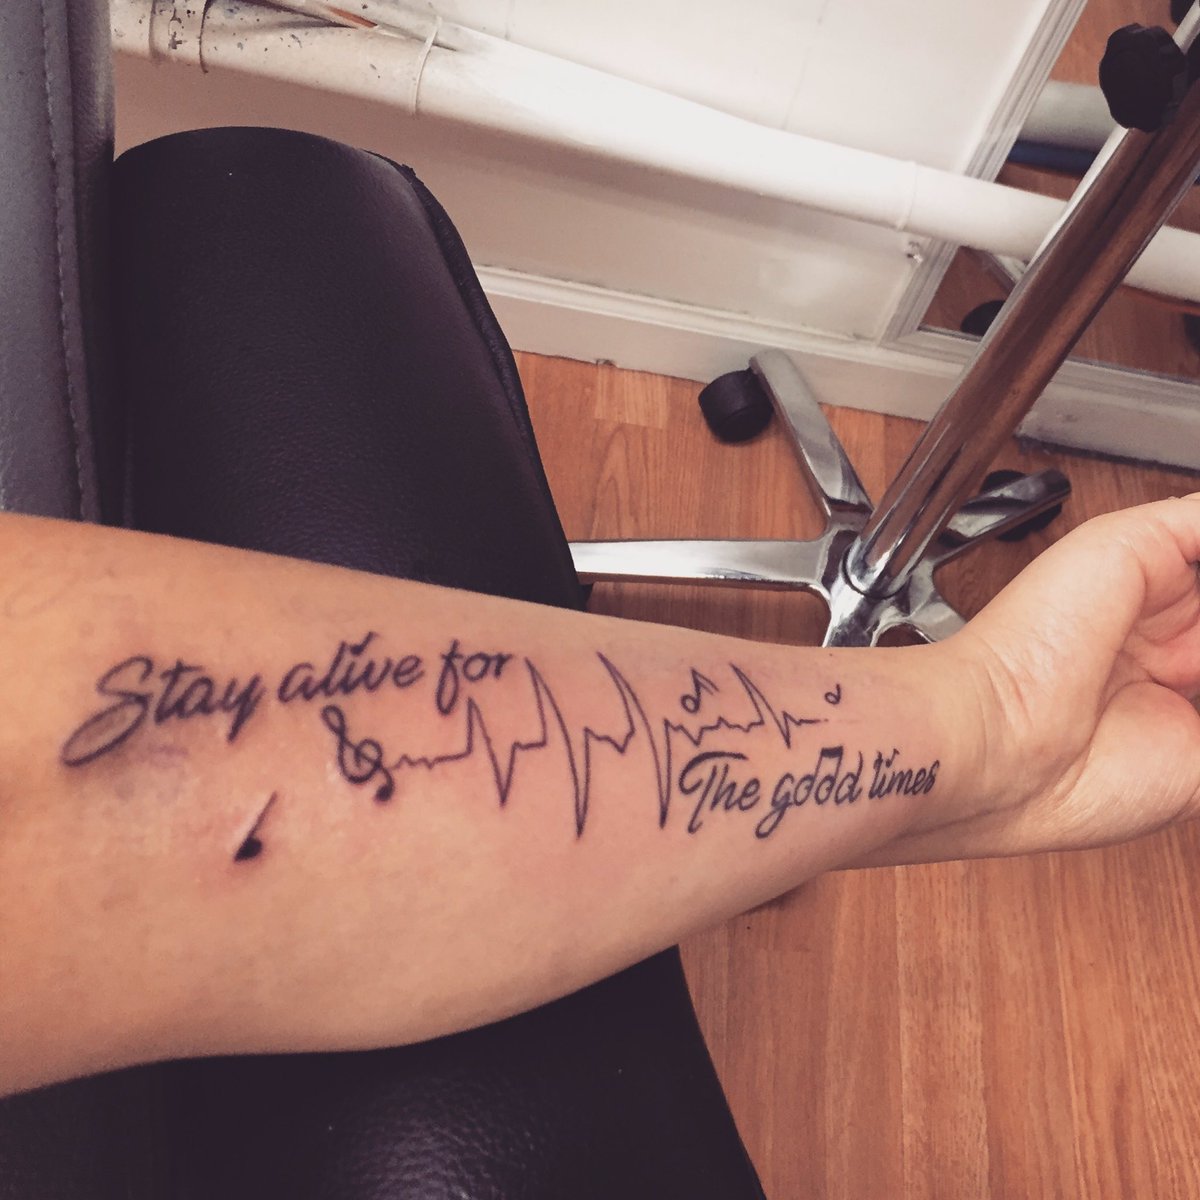 stay alive for me | Tattoos, Tattoo quotes, Staying alive